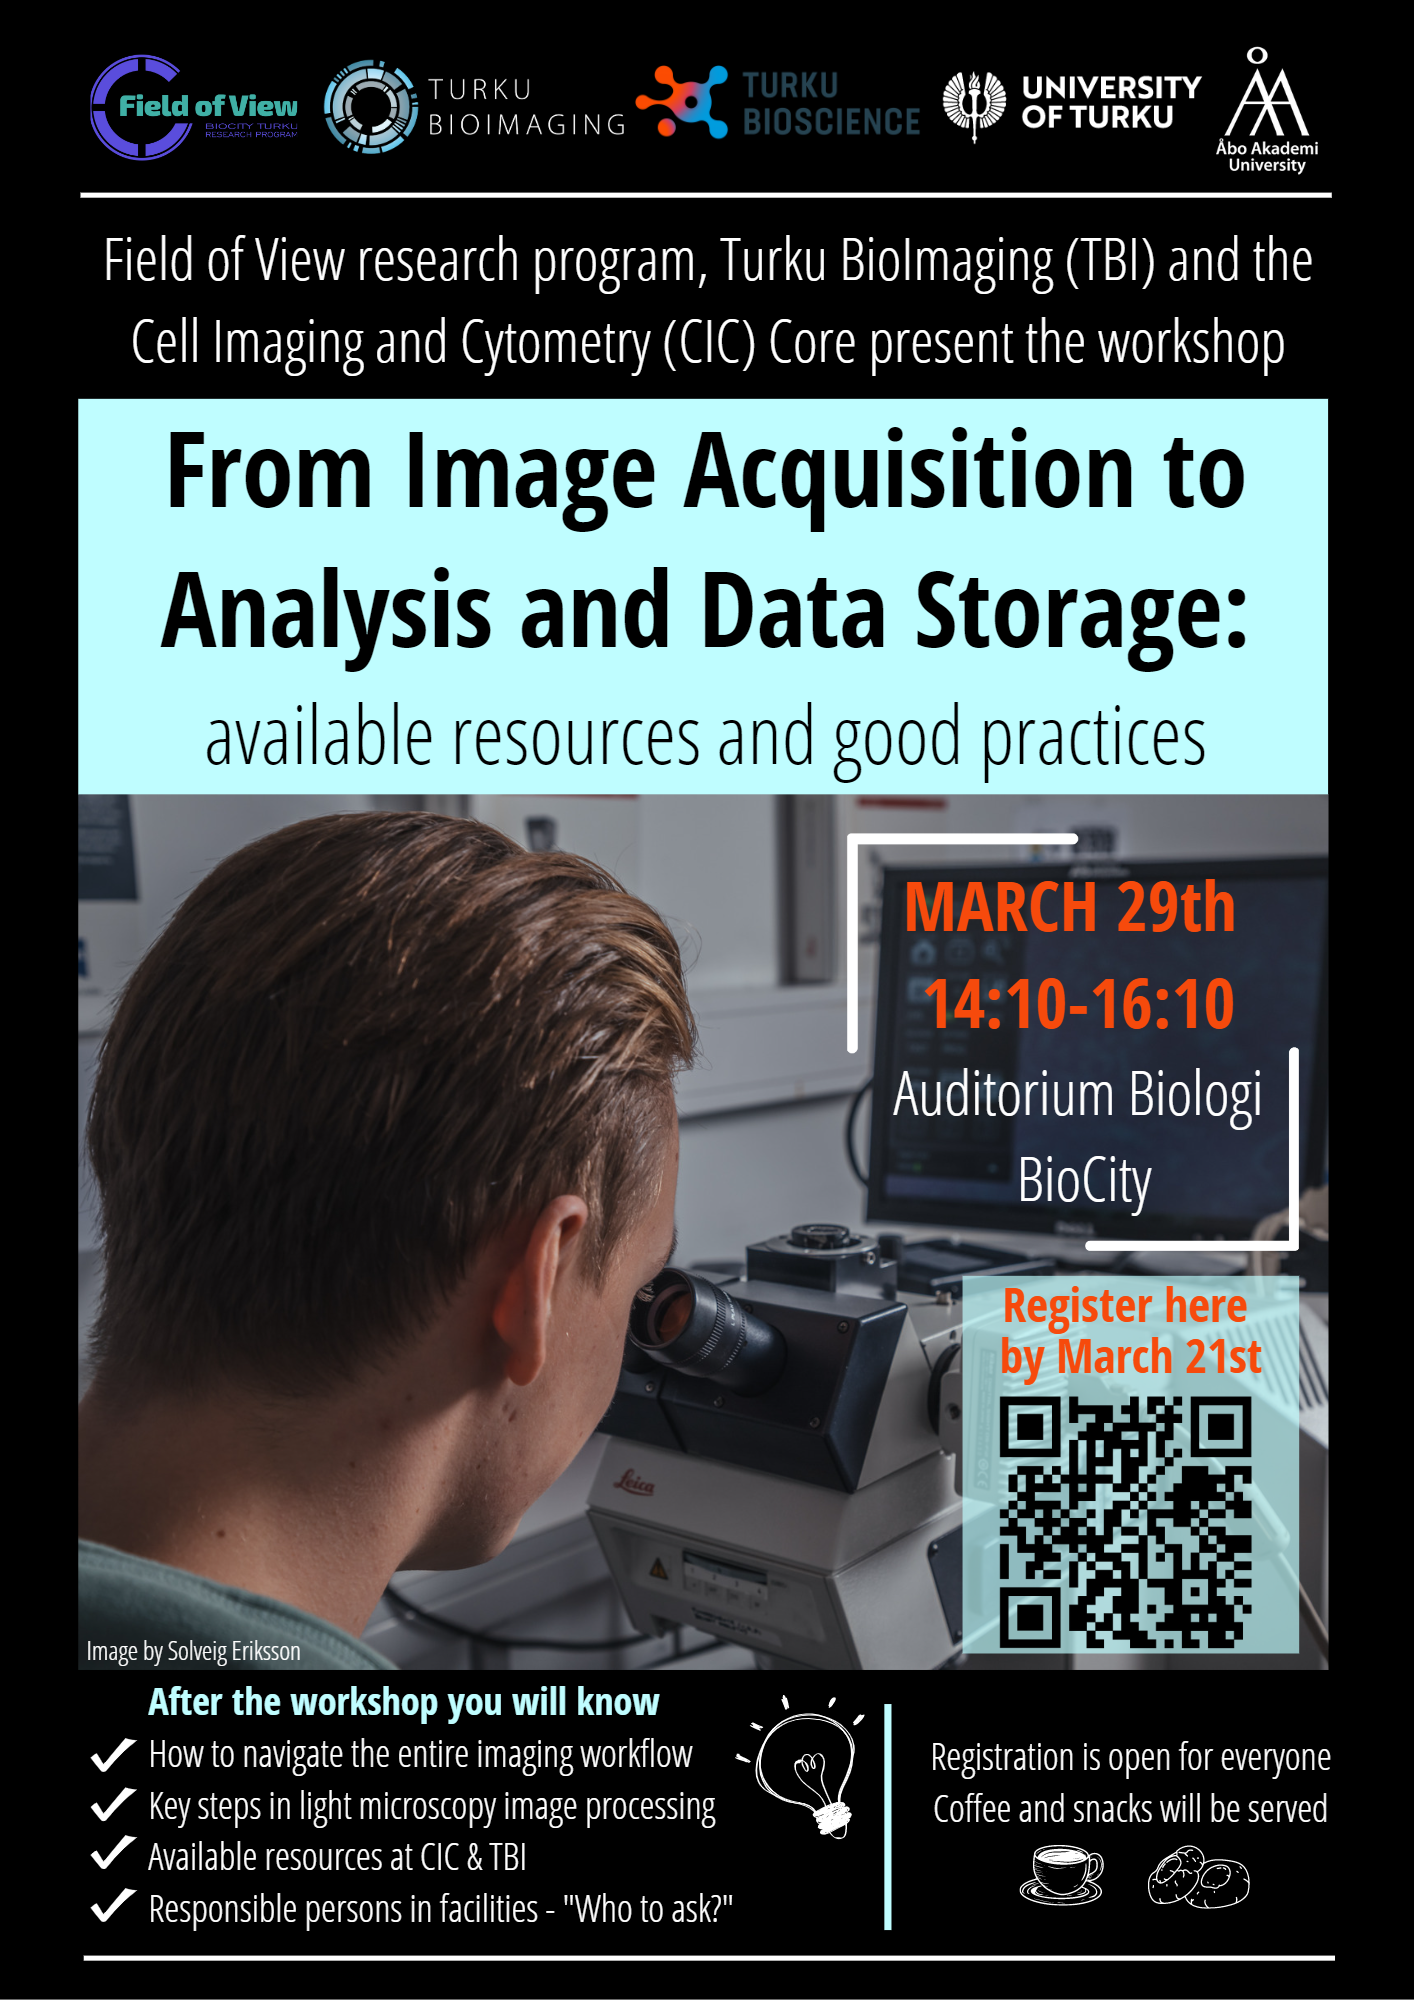 “From Image Acquisition to Analysis and Data Storage” Workshop